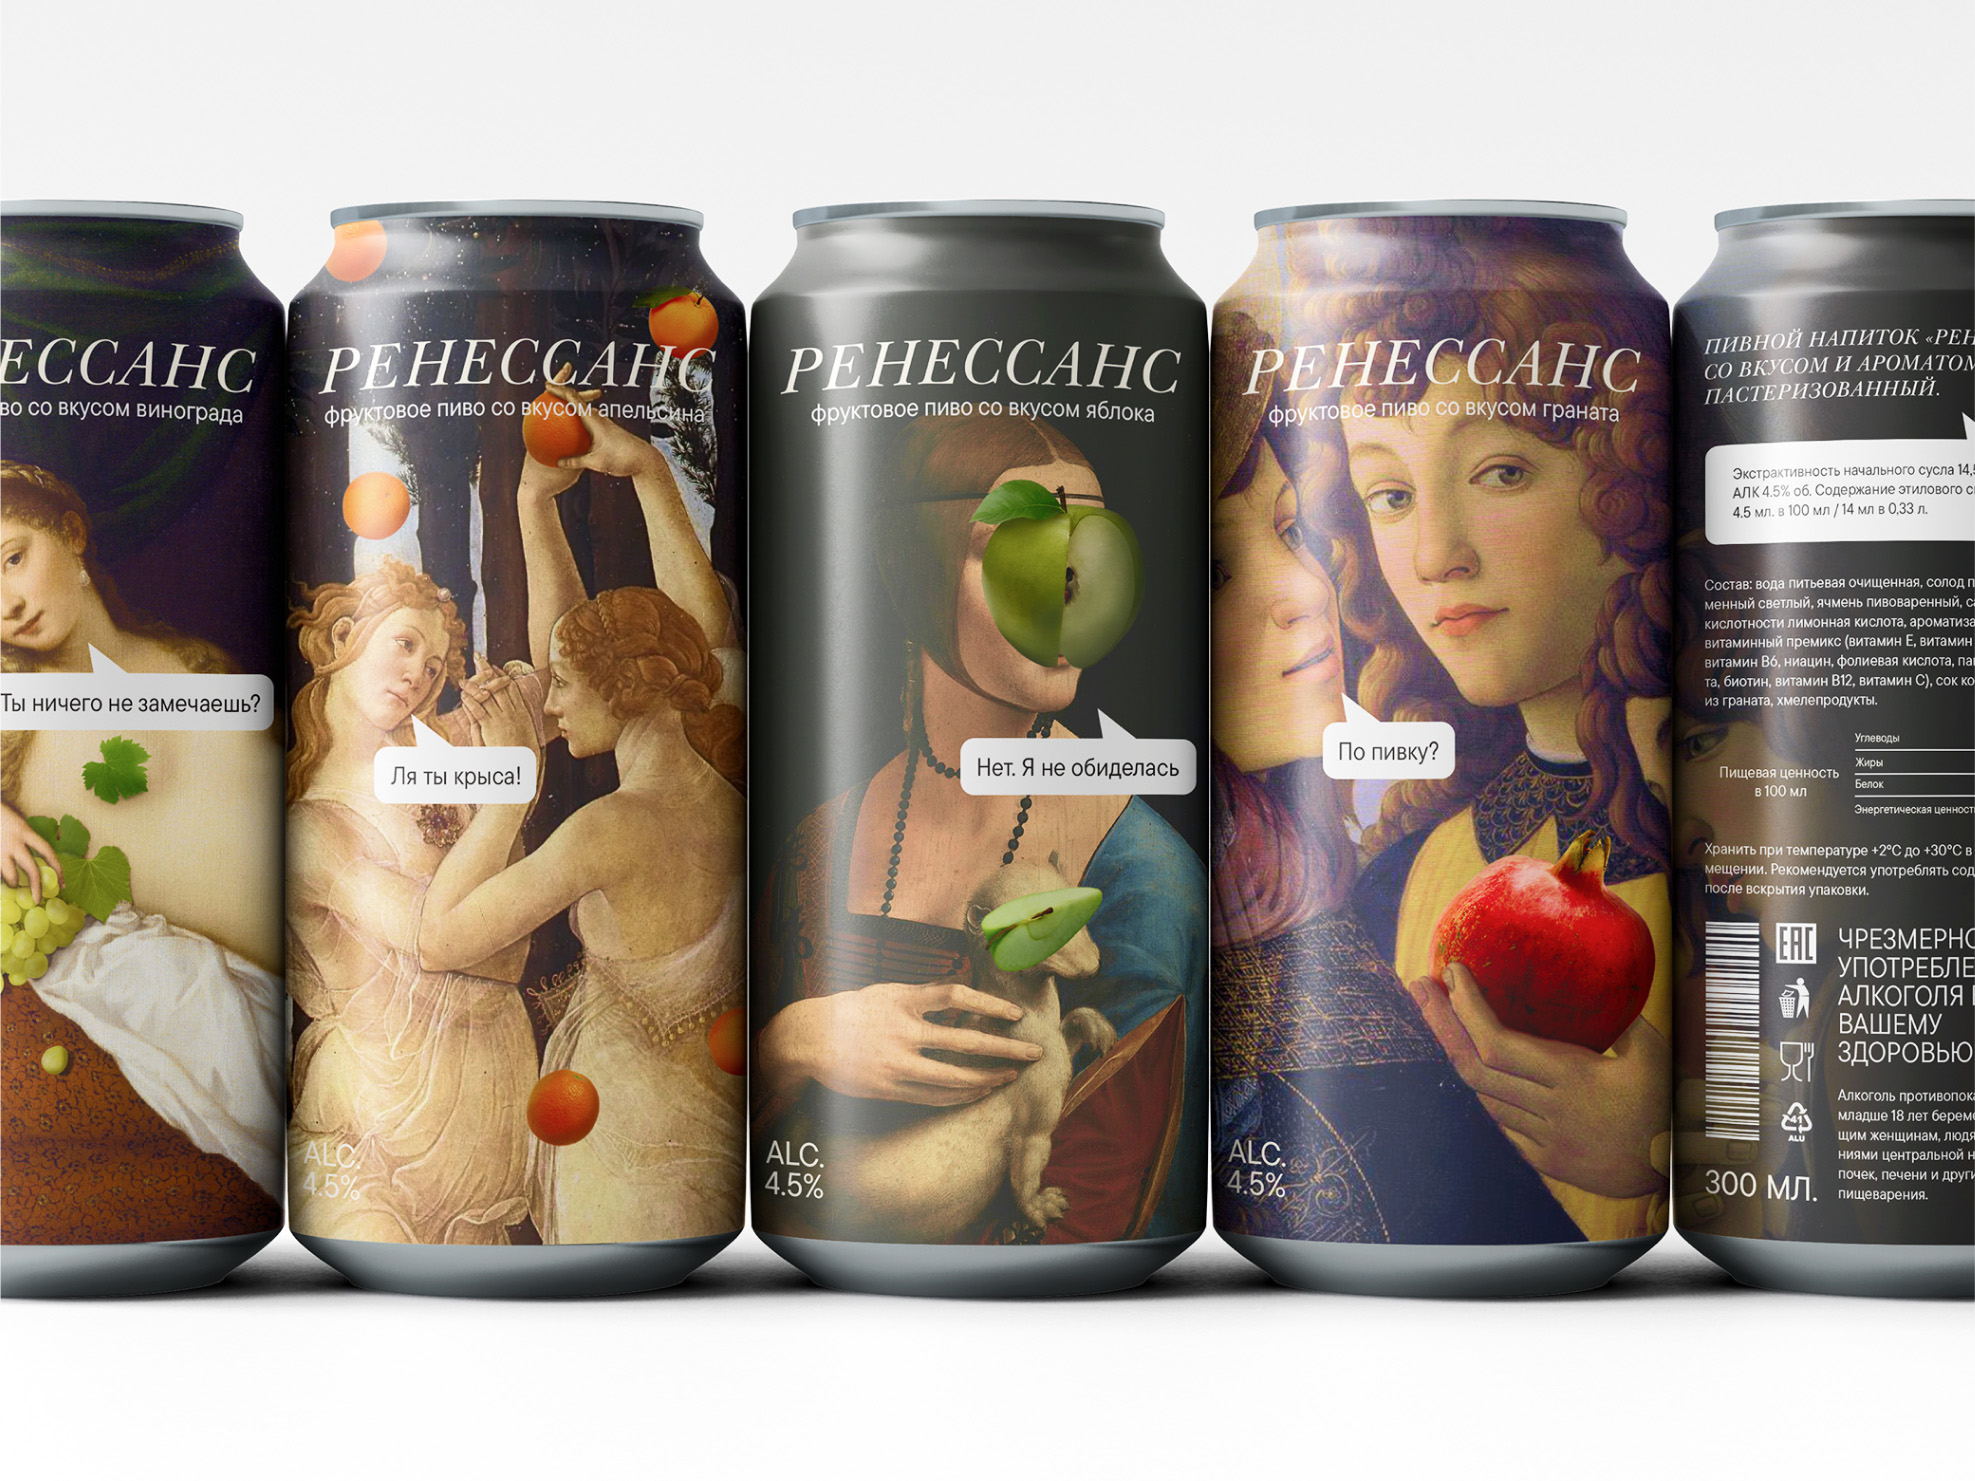 Student Concept Design of Fruit Beer Packaging for Female Audience “Renaissance”